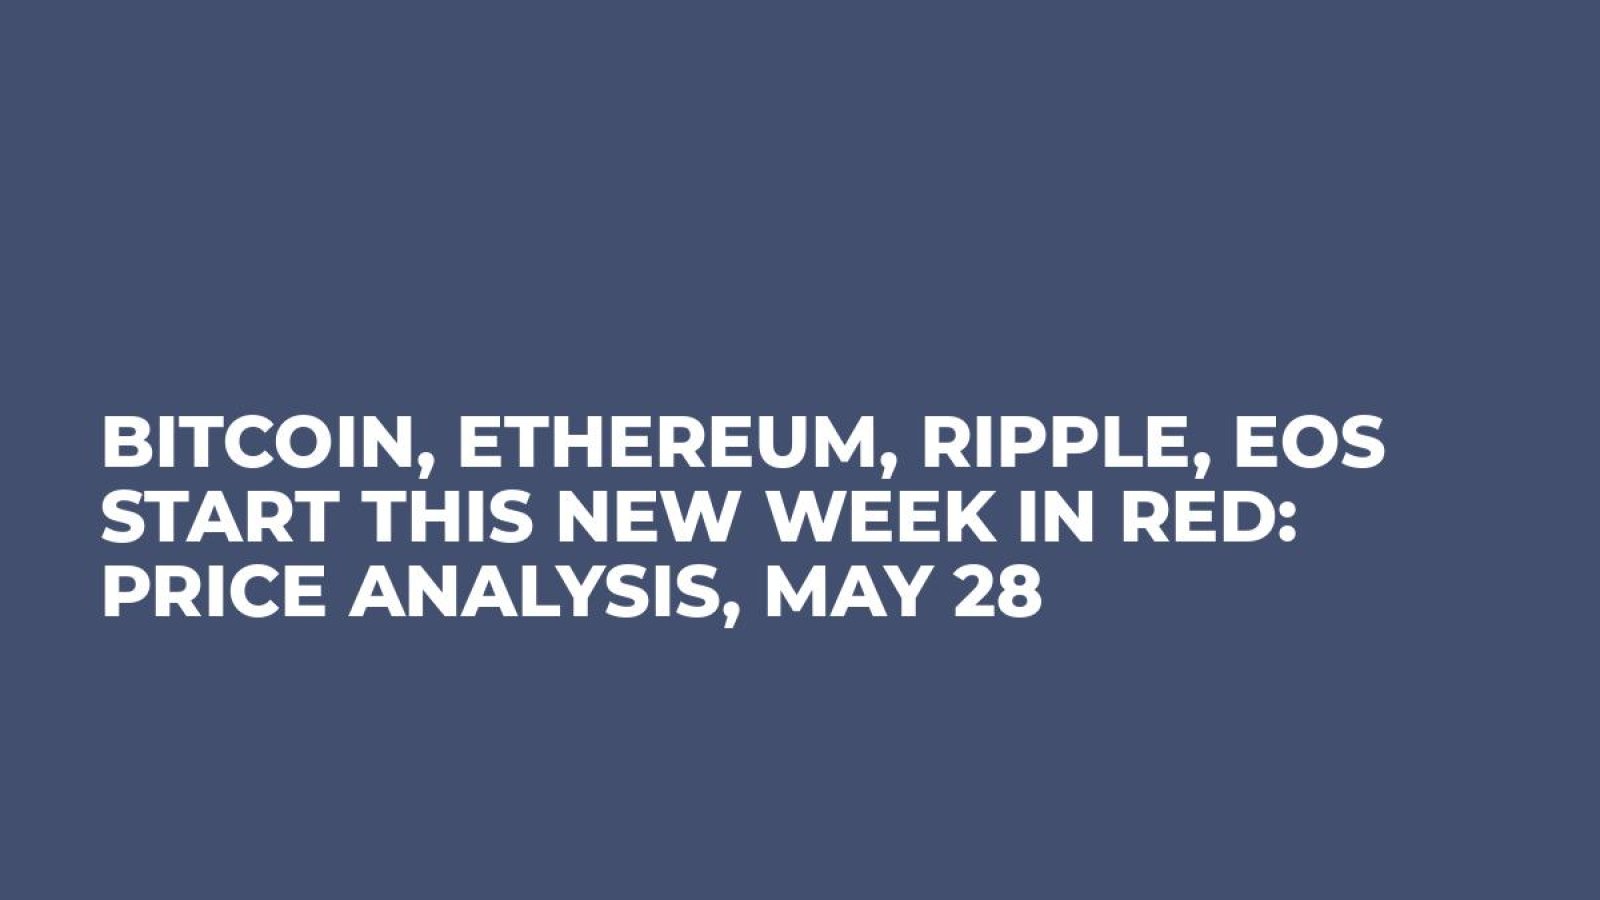 Bitcoin, Ethereum, Ripple, EOS Start This New Week in Red: Price Analysis, May 28